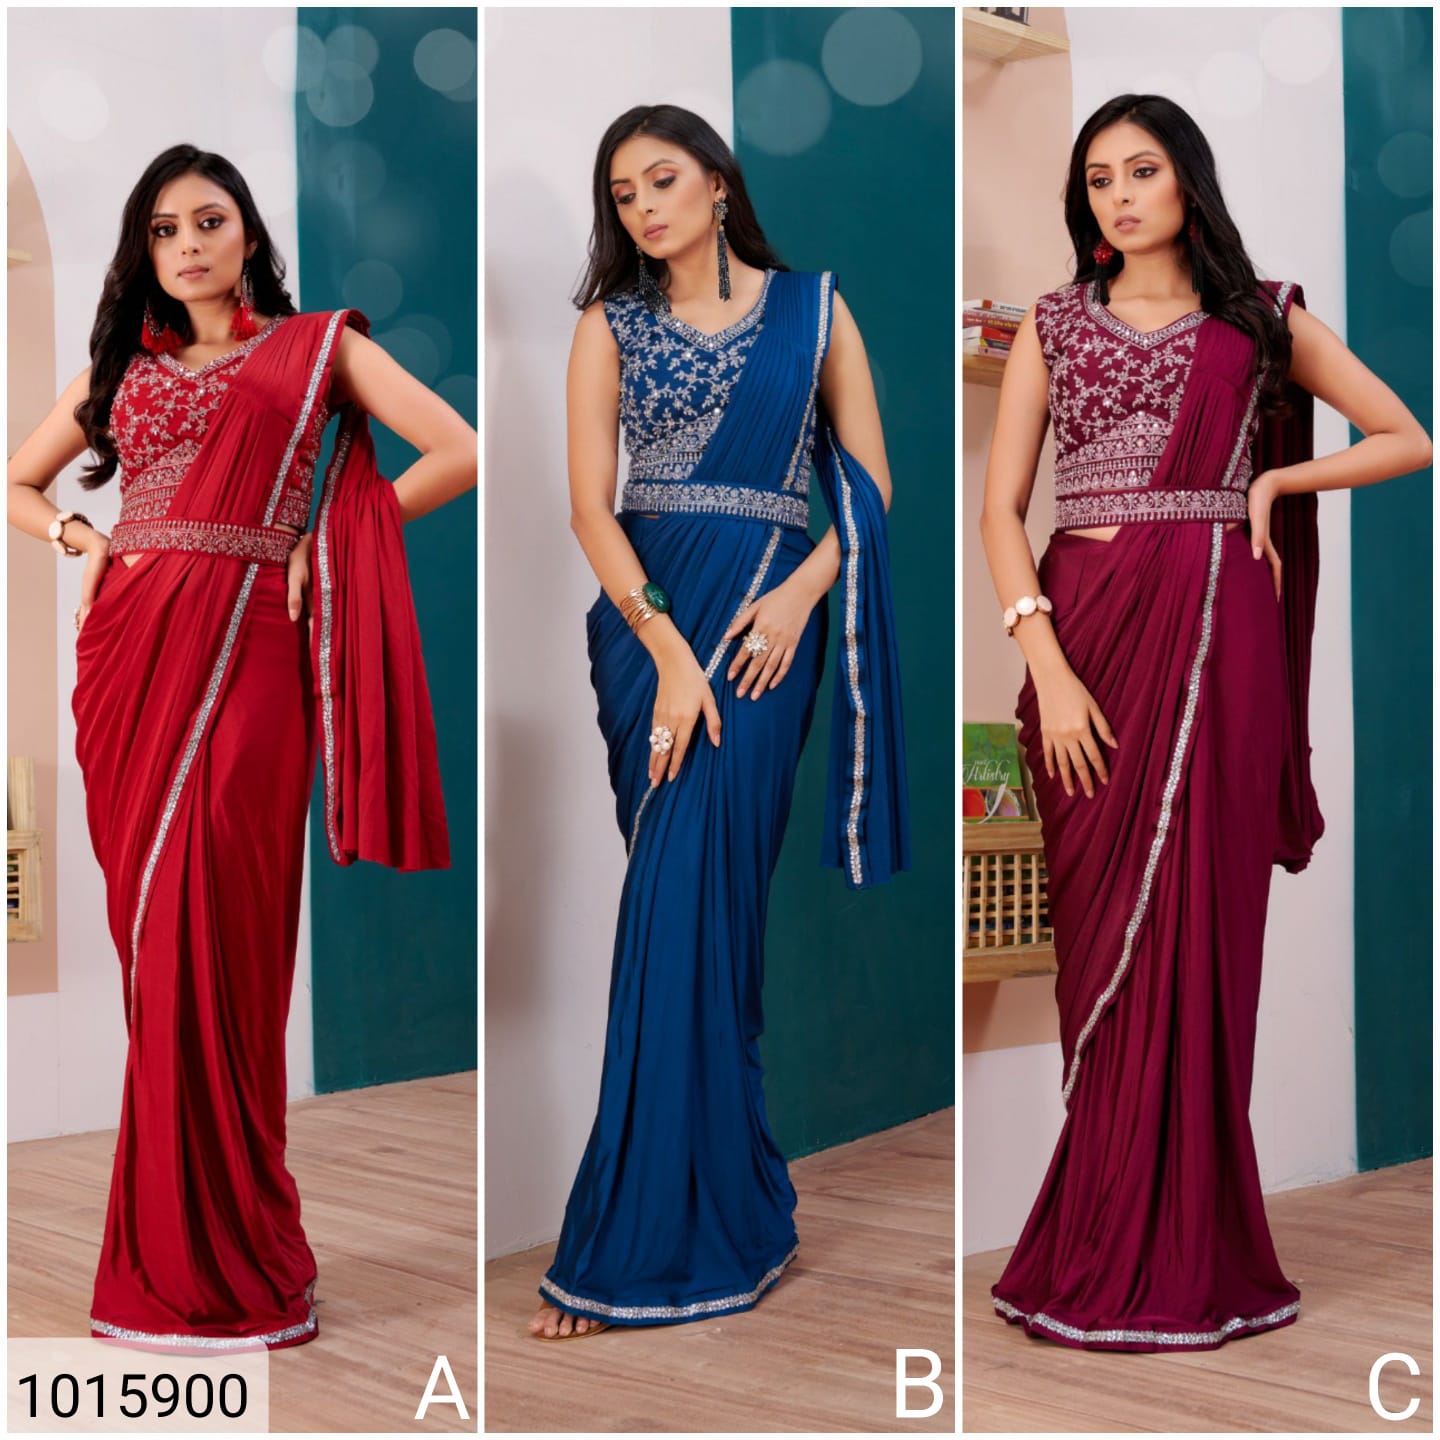 Aamoha Trendz Ready To Wear Designer Saree 1015900 Colors 